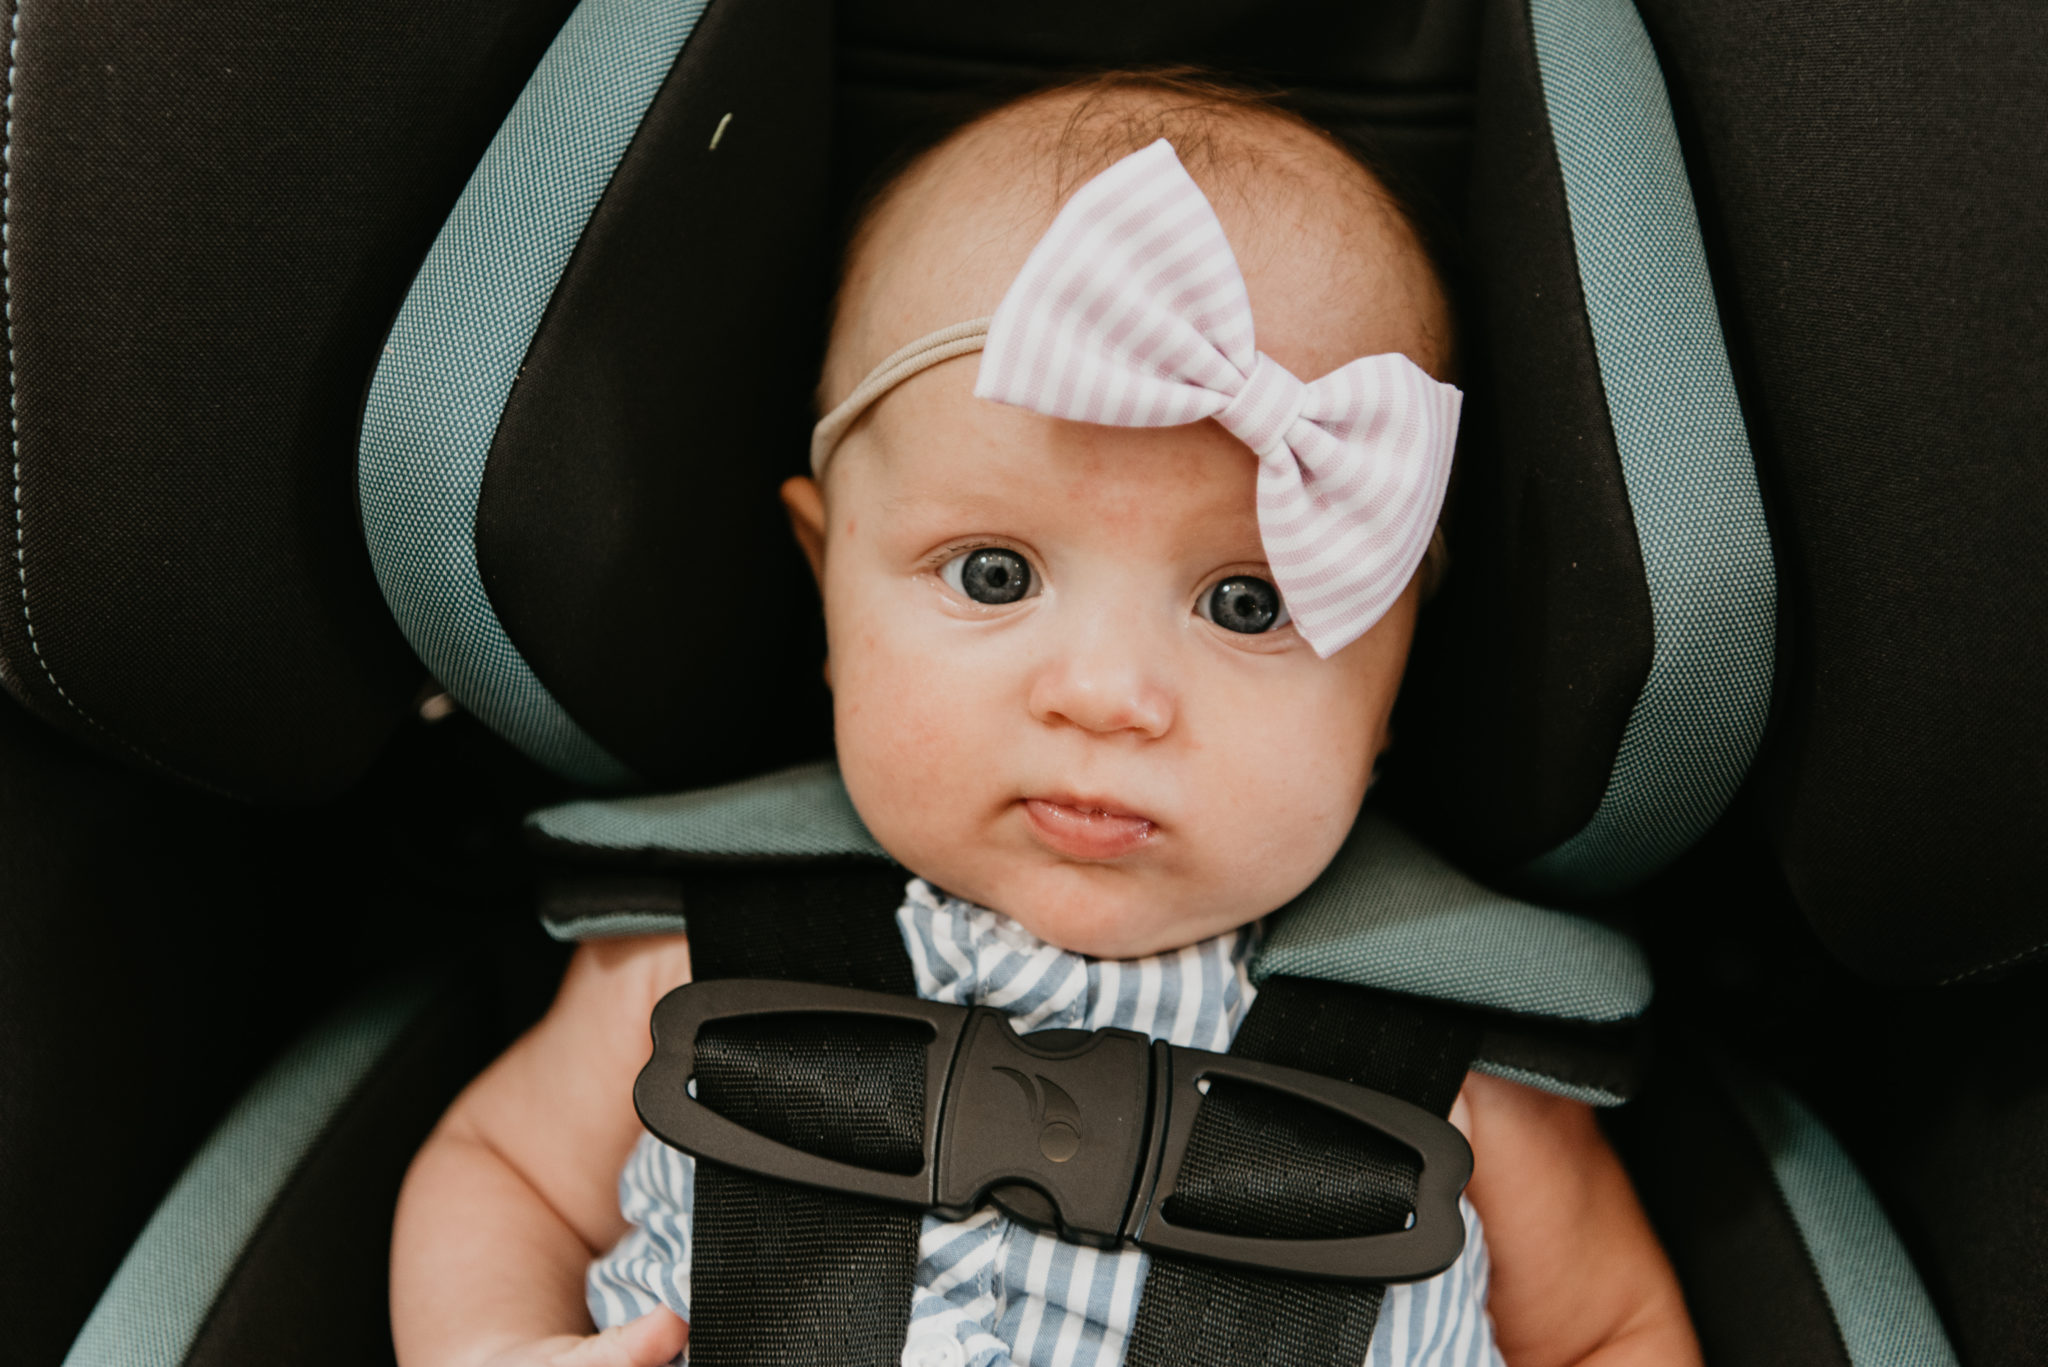 Baby Jogger Car Seat review featured by popular Las Vegas life and style blogger, Outfits & Outings